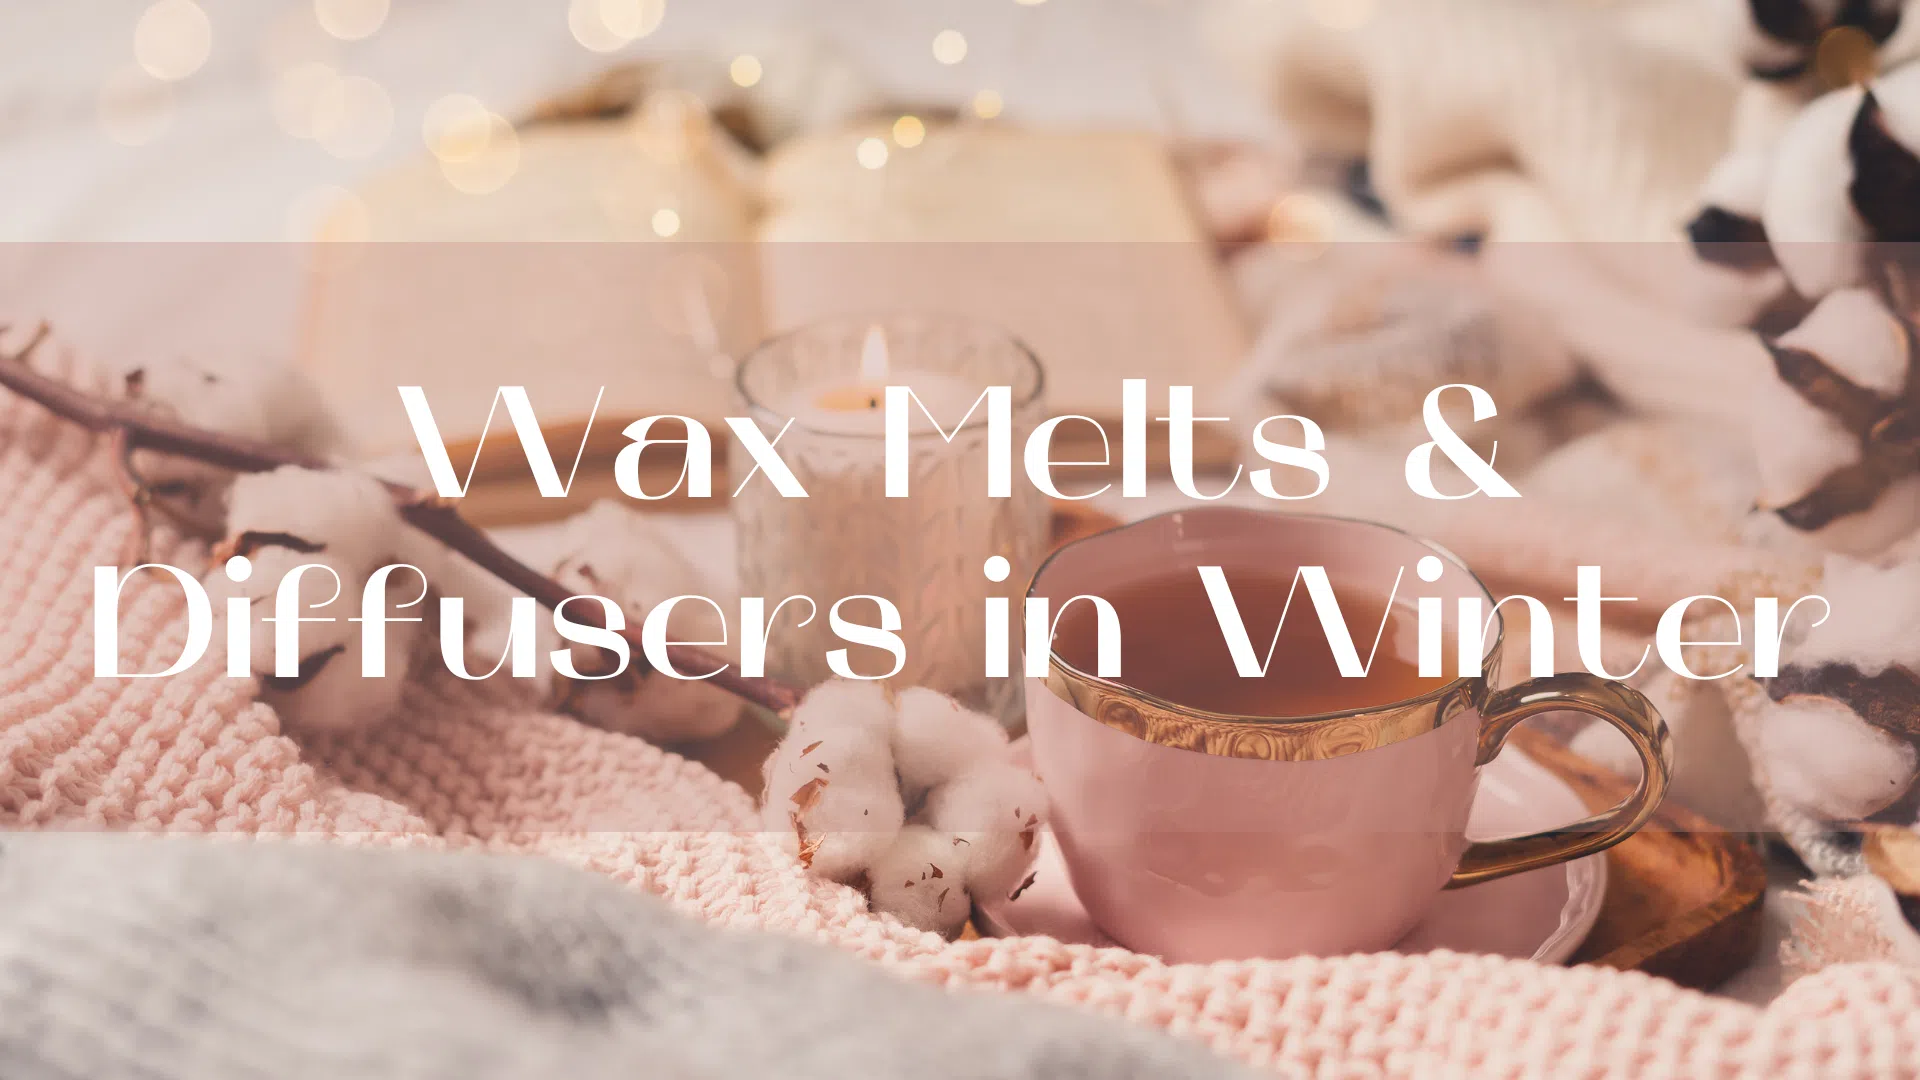 The_Warmth_and_Wellbeing_Wax_Melts_blog